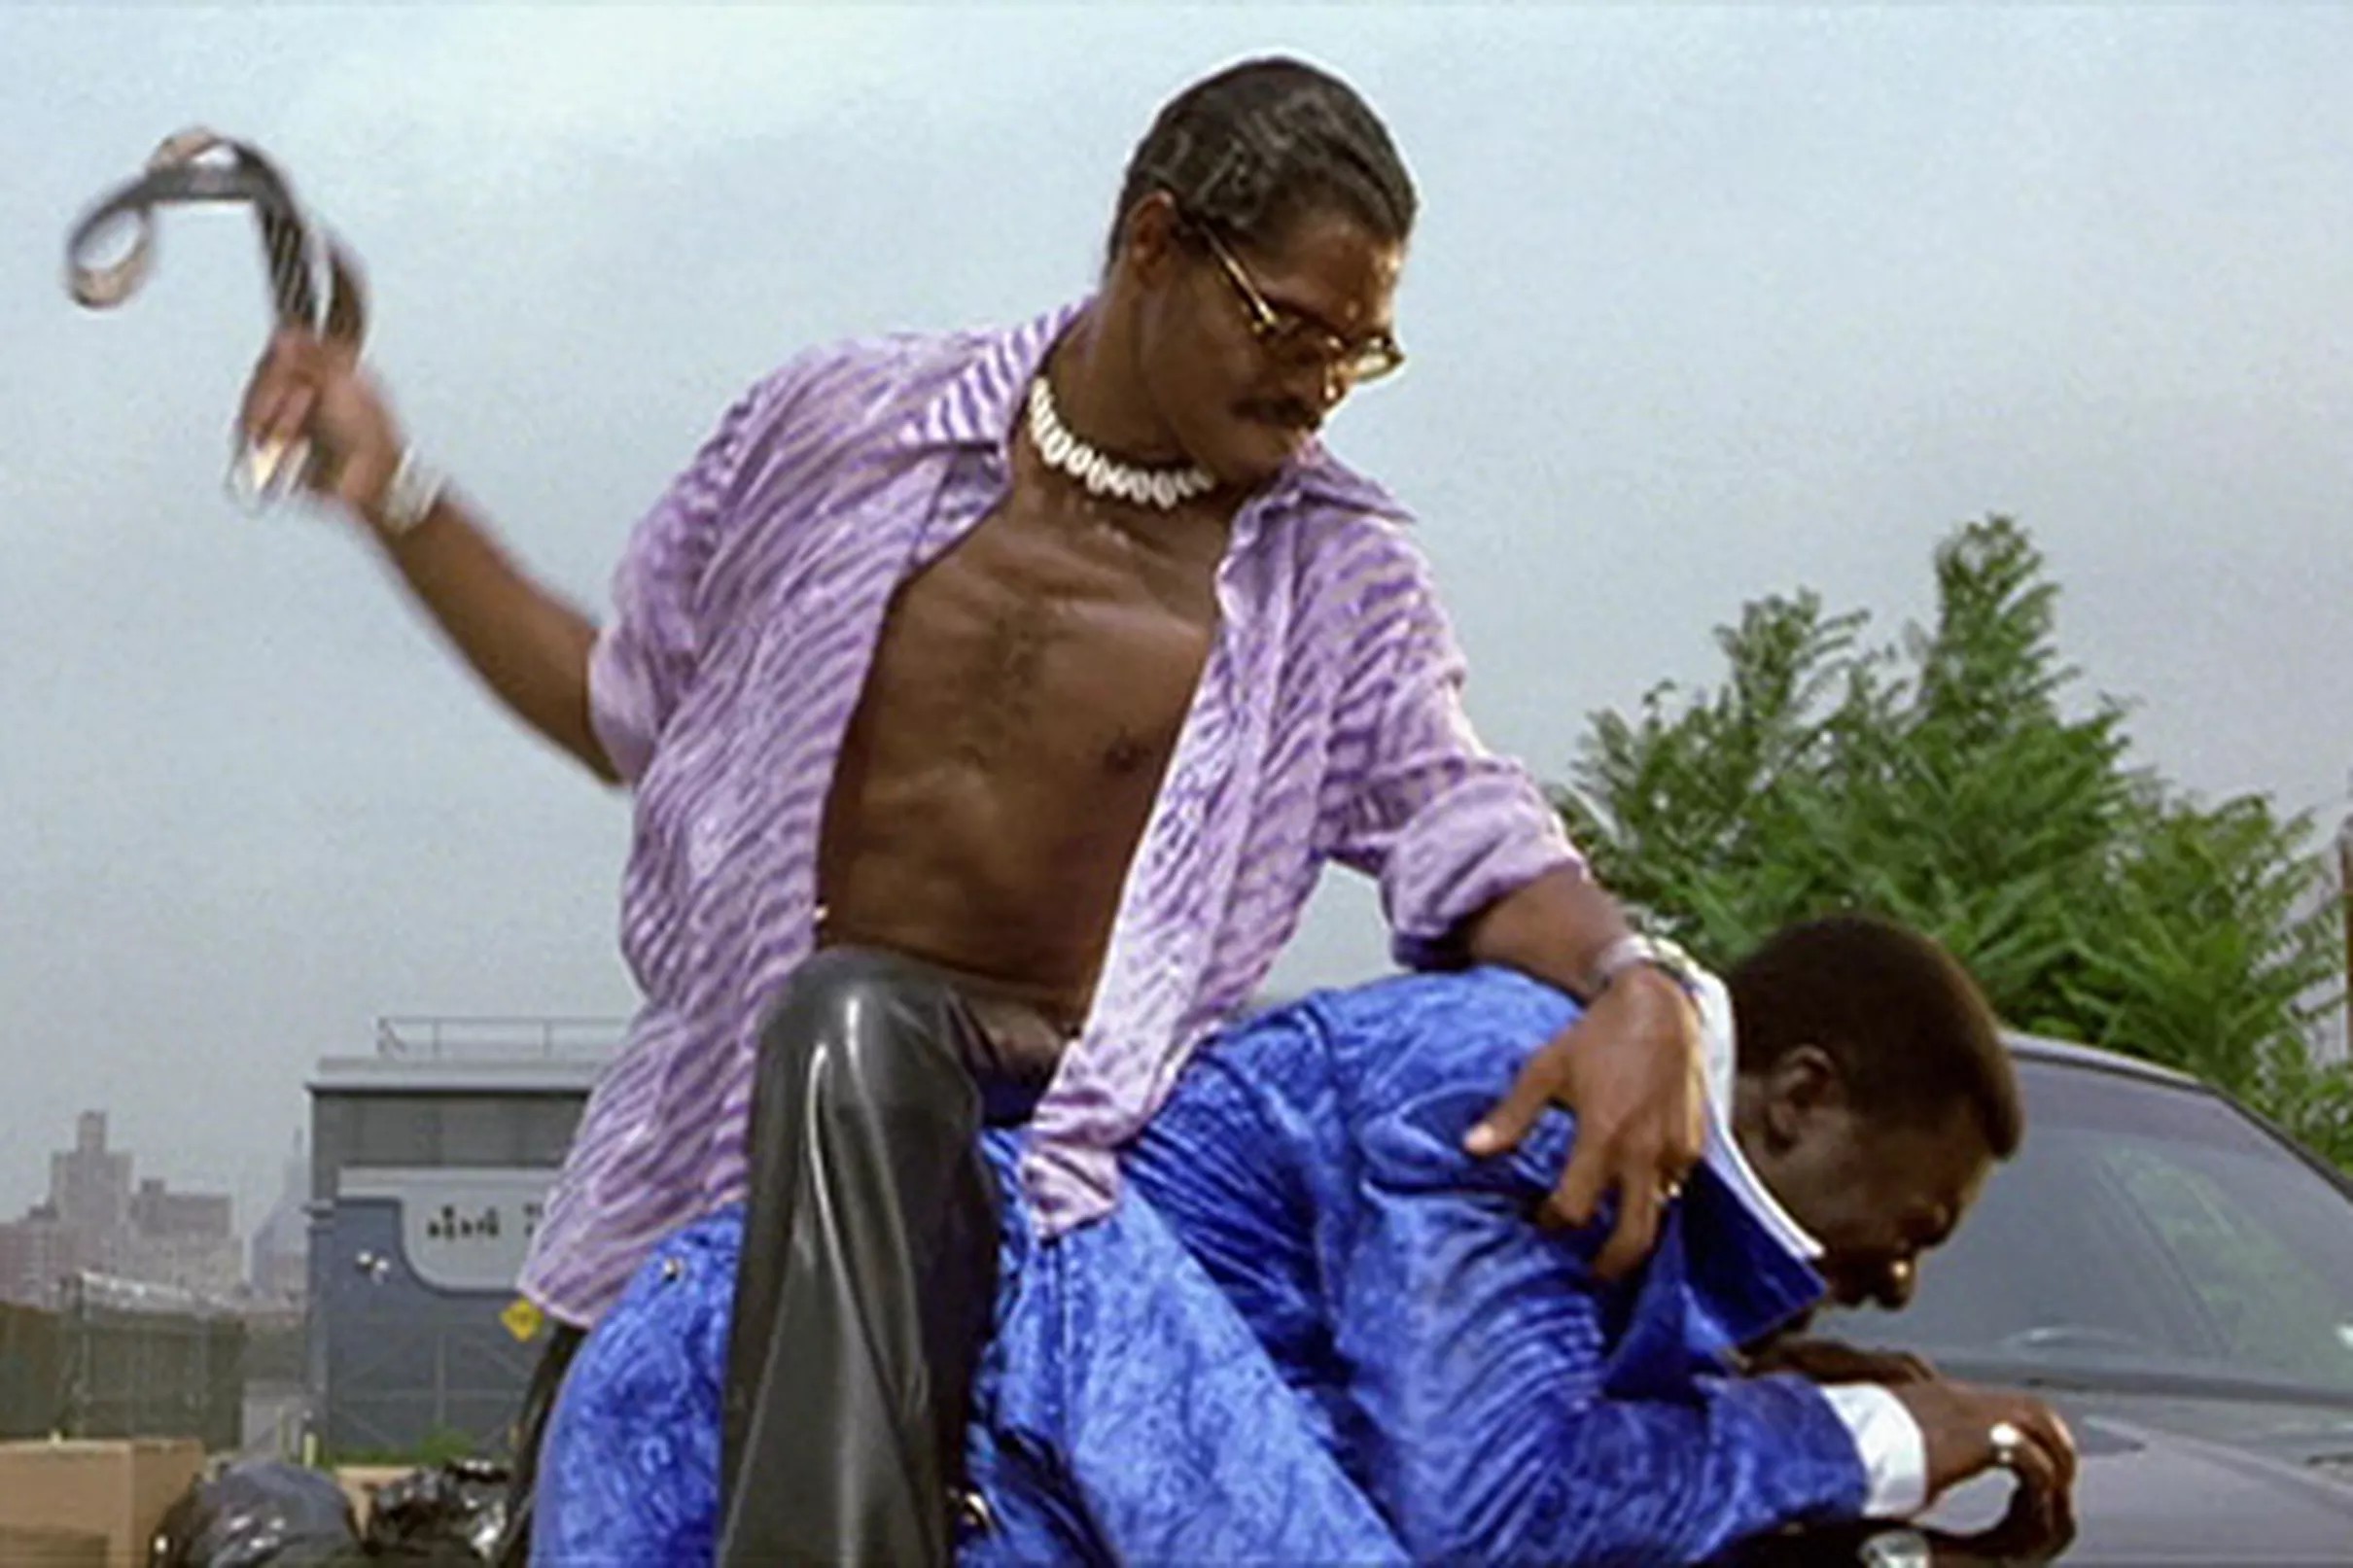 Pootie Tang is real, and it really is possible to fight multiple assailants...